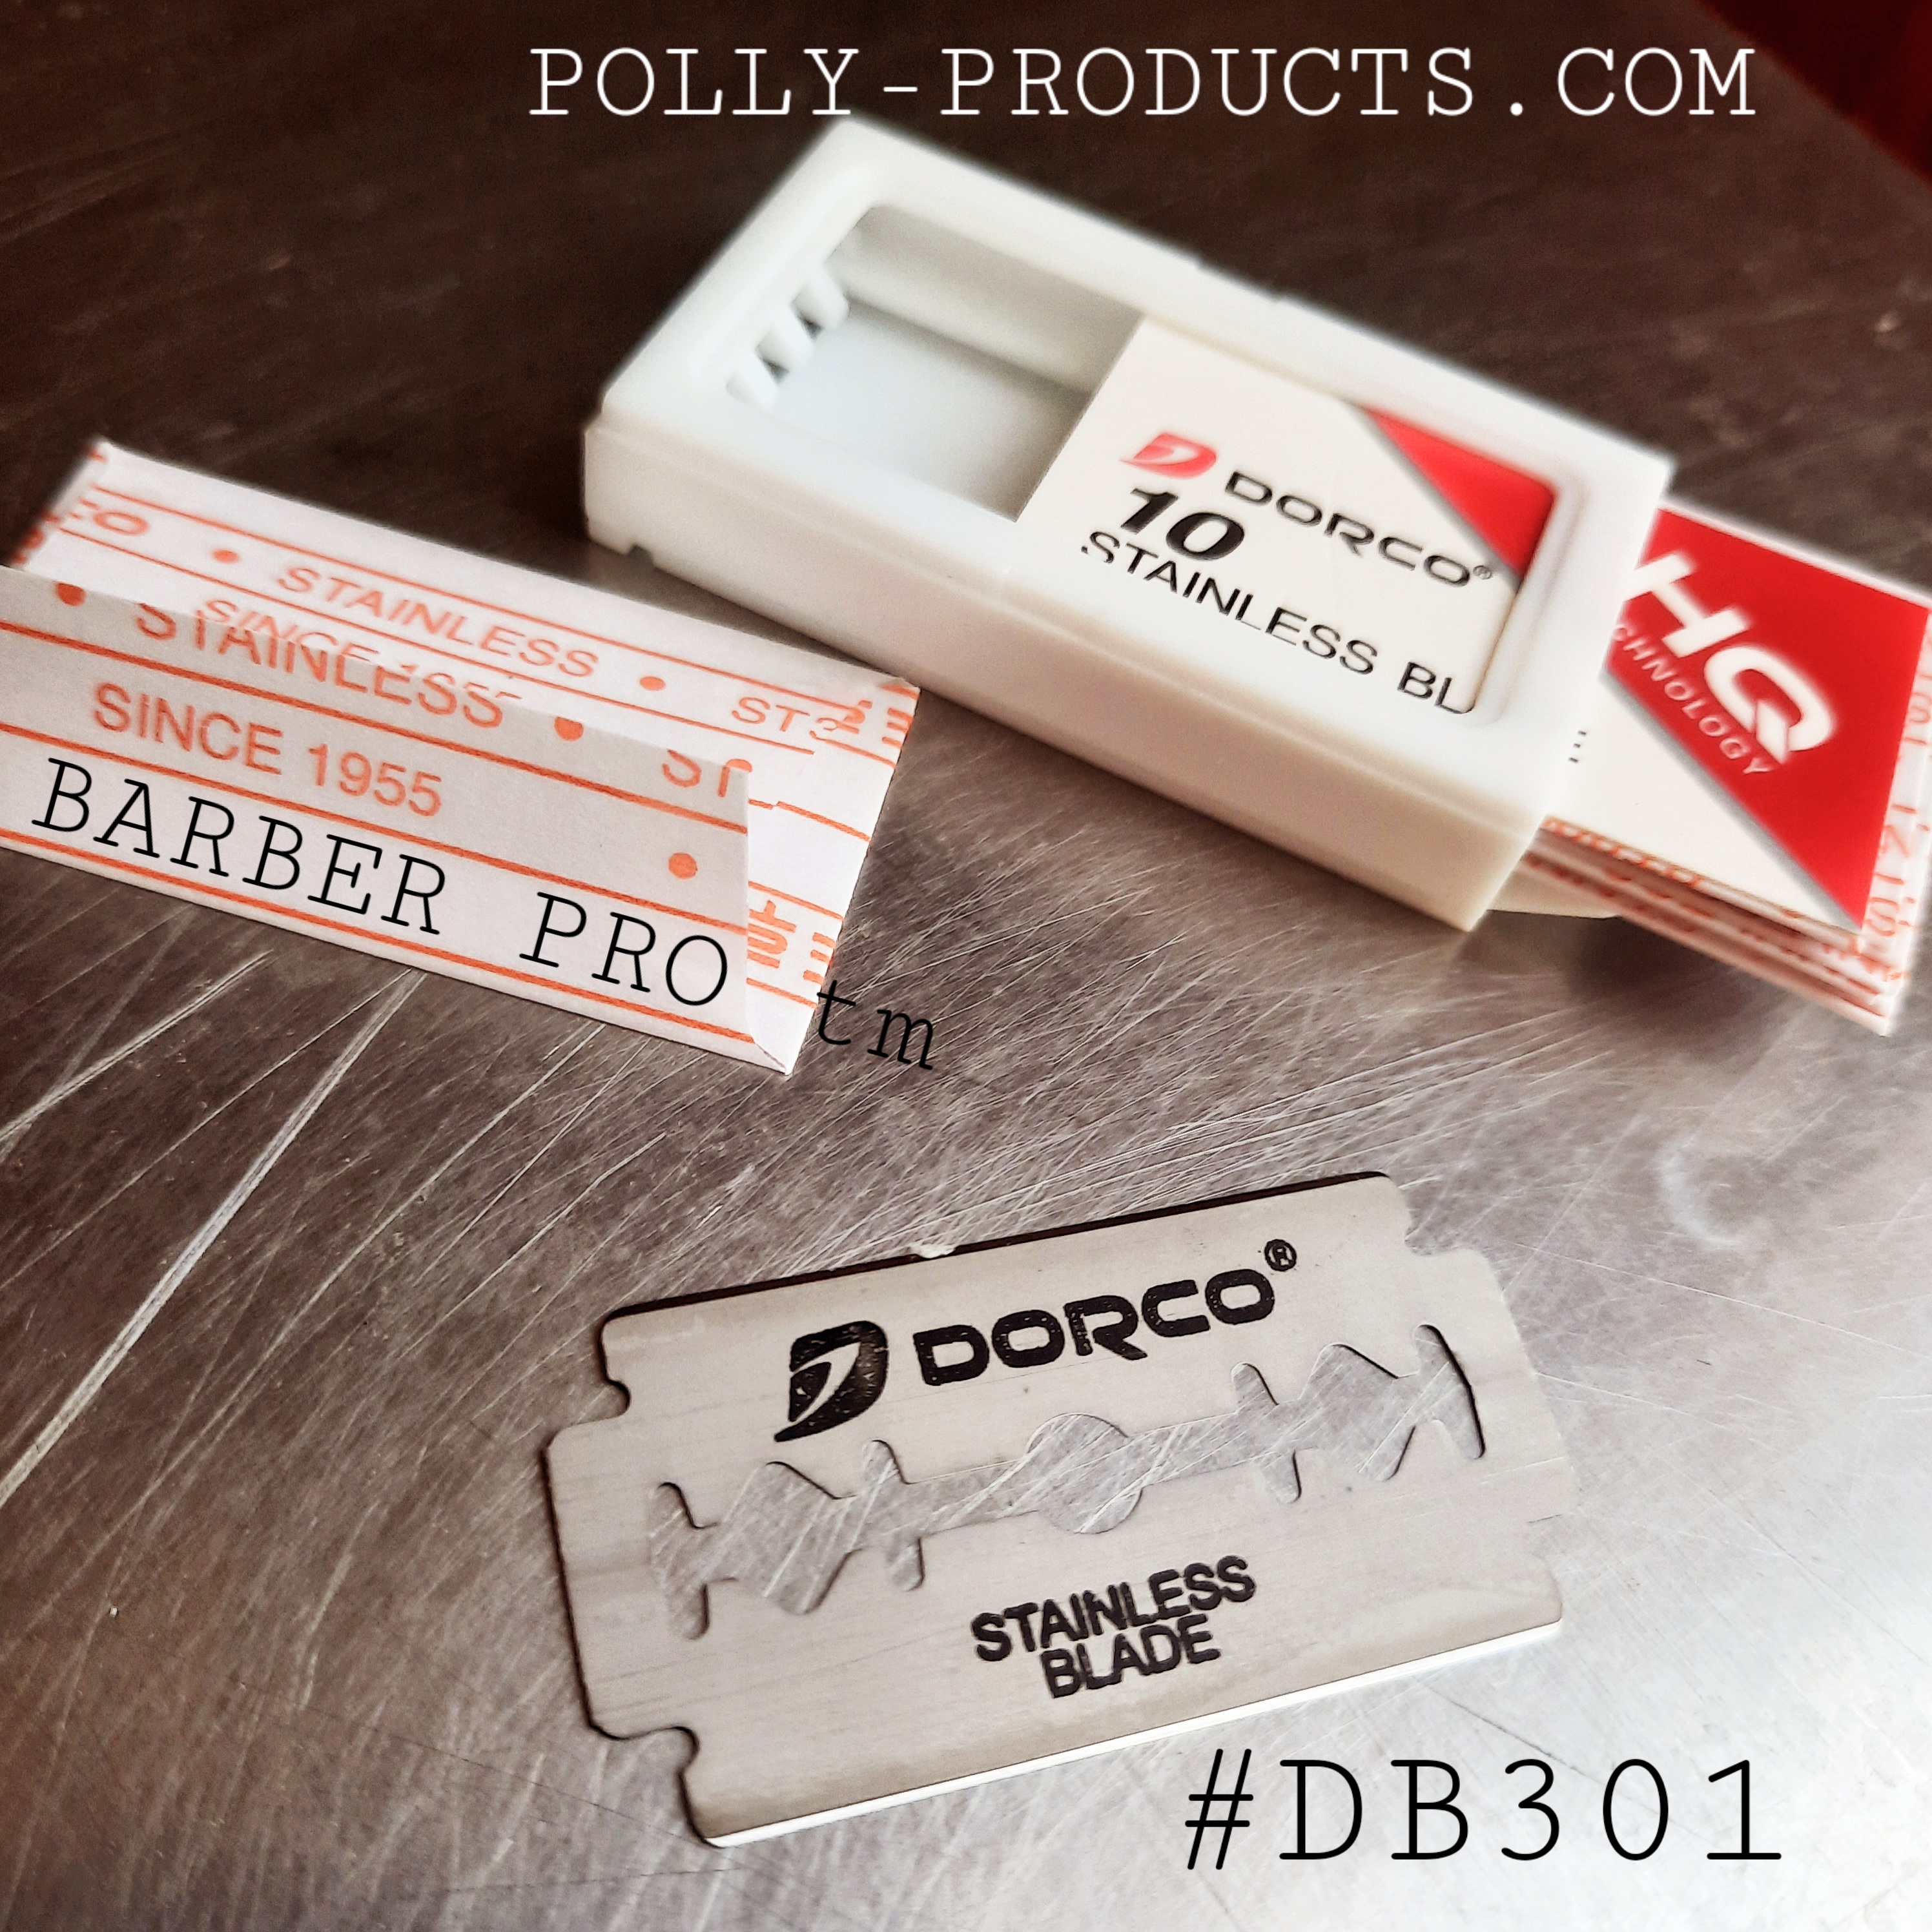 POLLY PRODUCTS BARBER PRO tm DORCO STAINLESS STEEL BLADES #DB301 